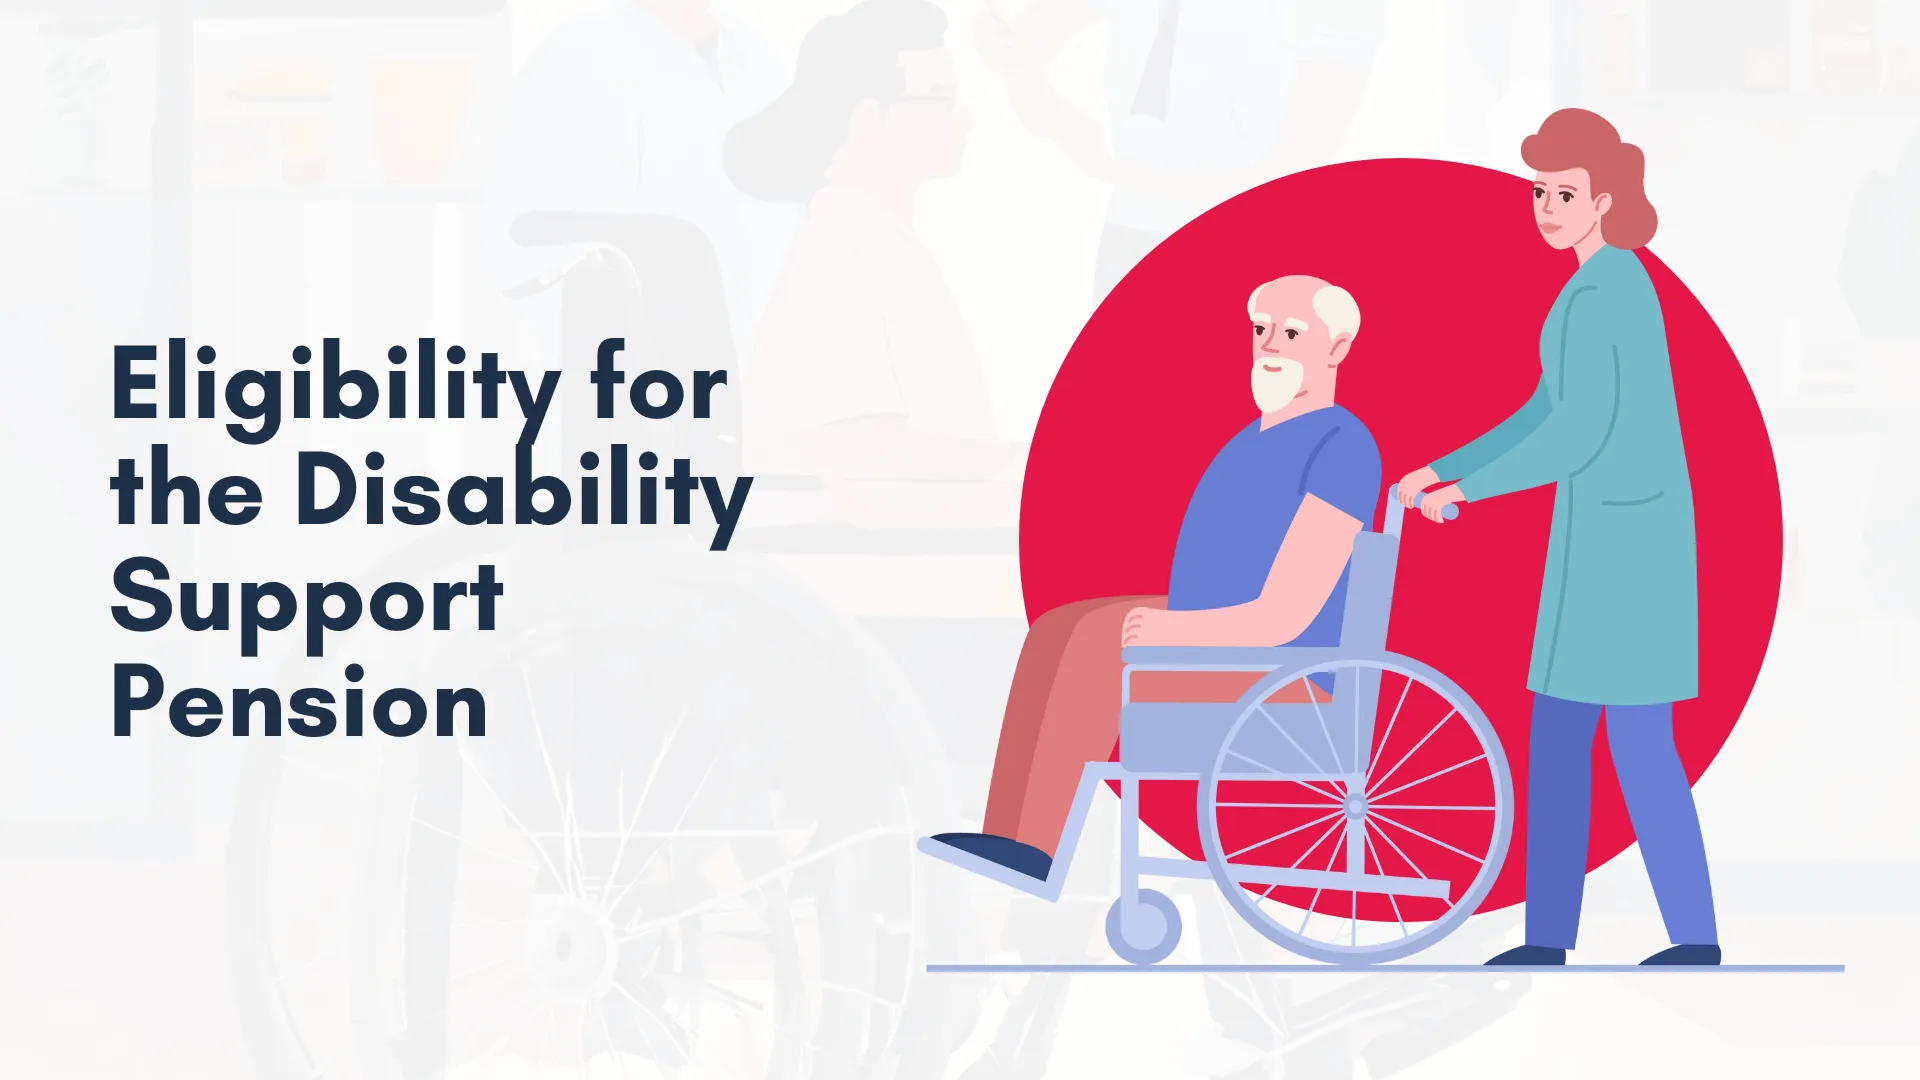 Eligibility for the Disability Support Pension